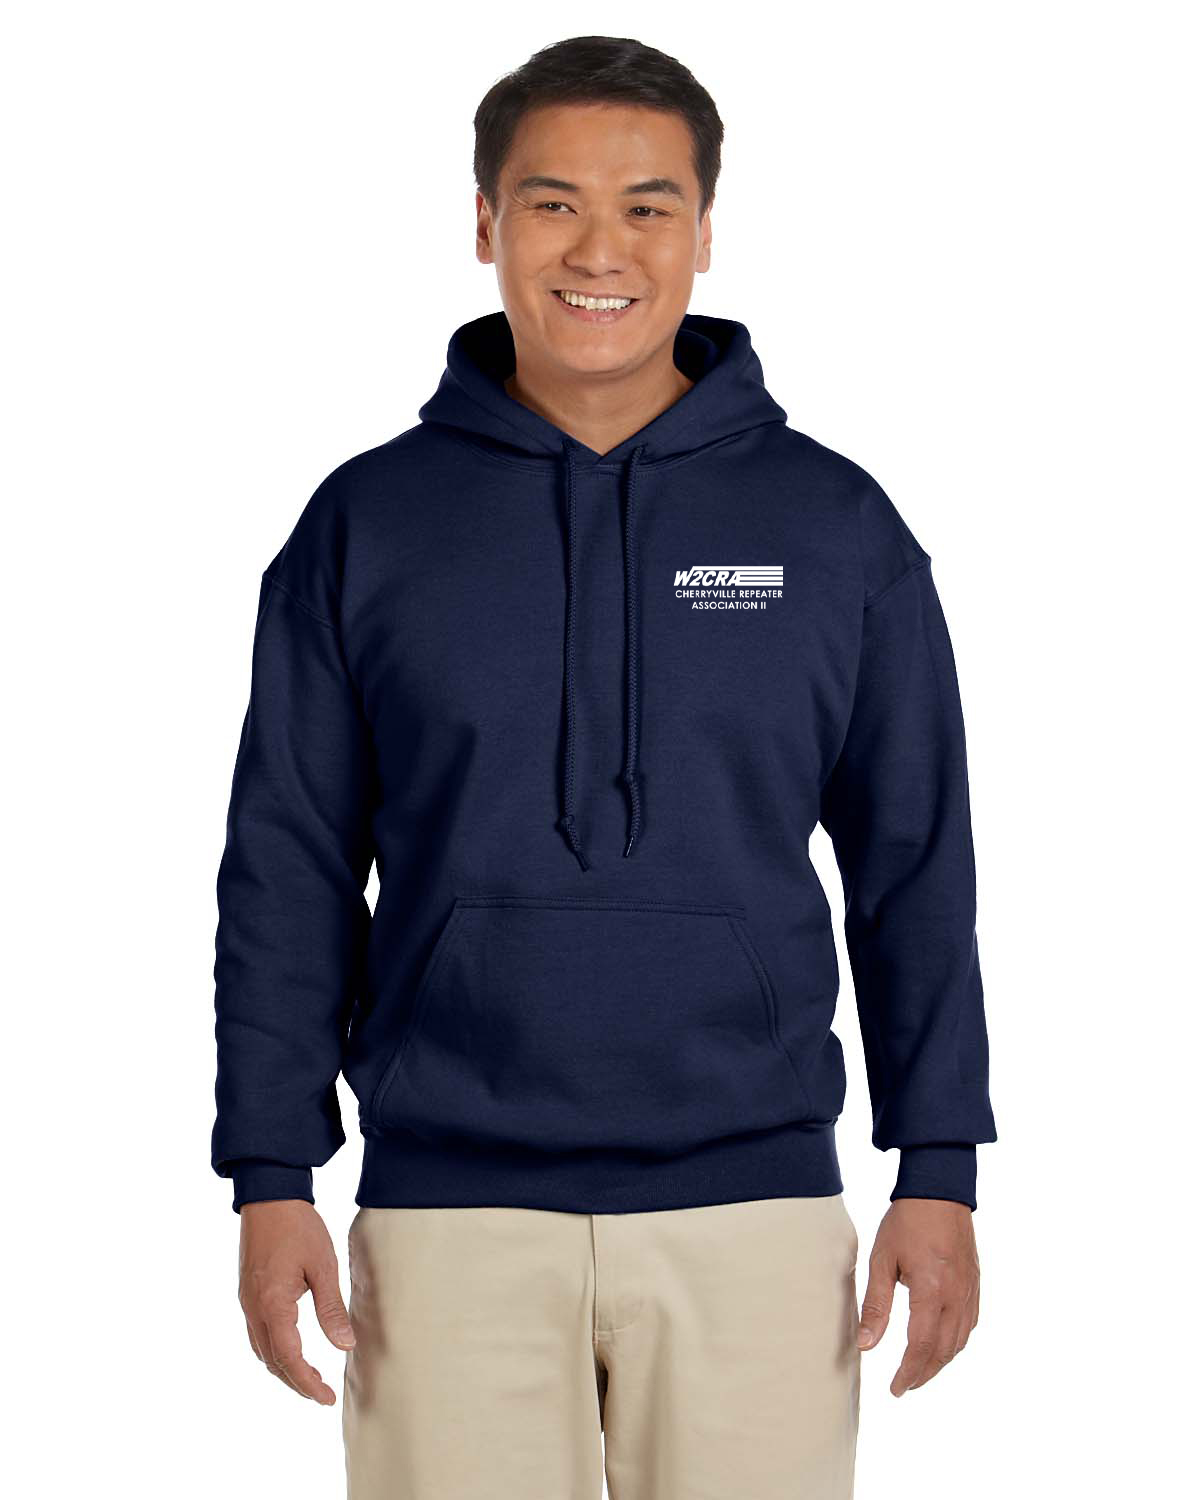 KSS185 Navy Hoodie with White Logo on Left Chest